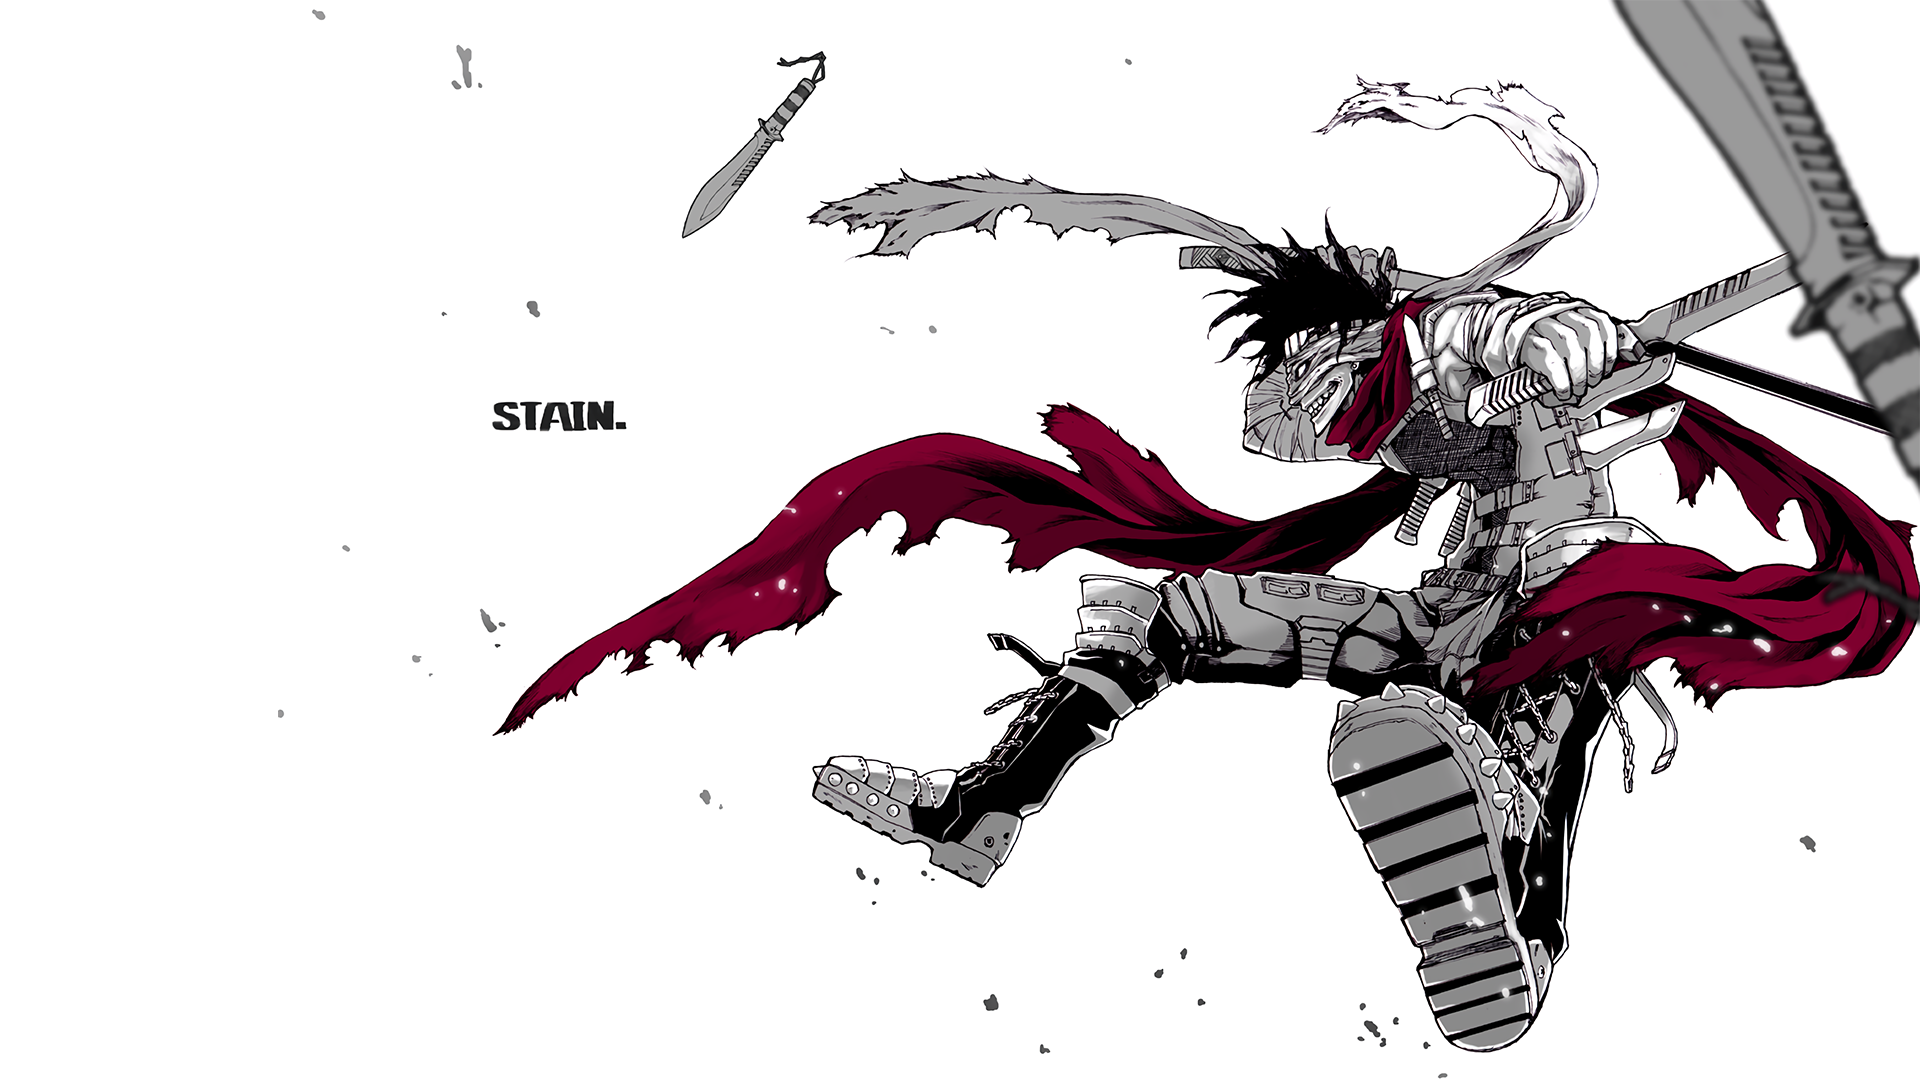 The Hero Killer Stain by ぺこ